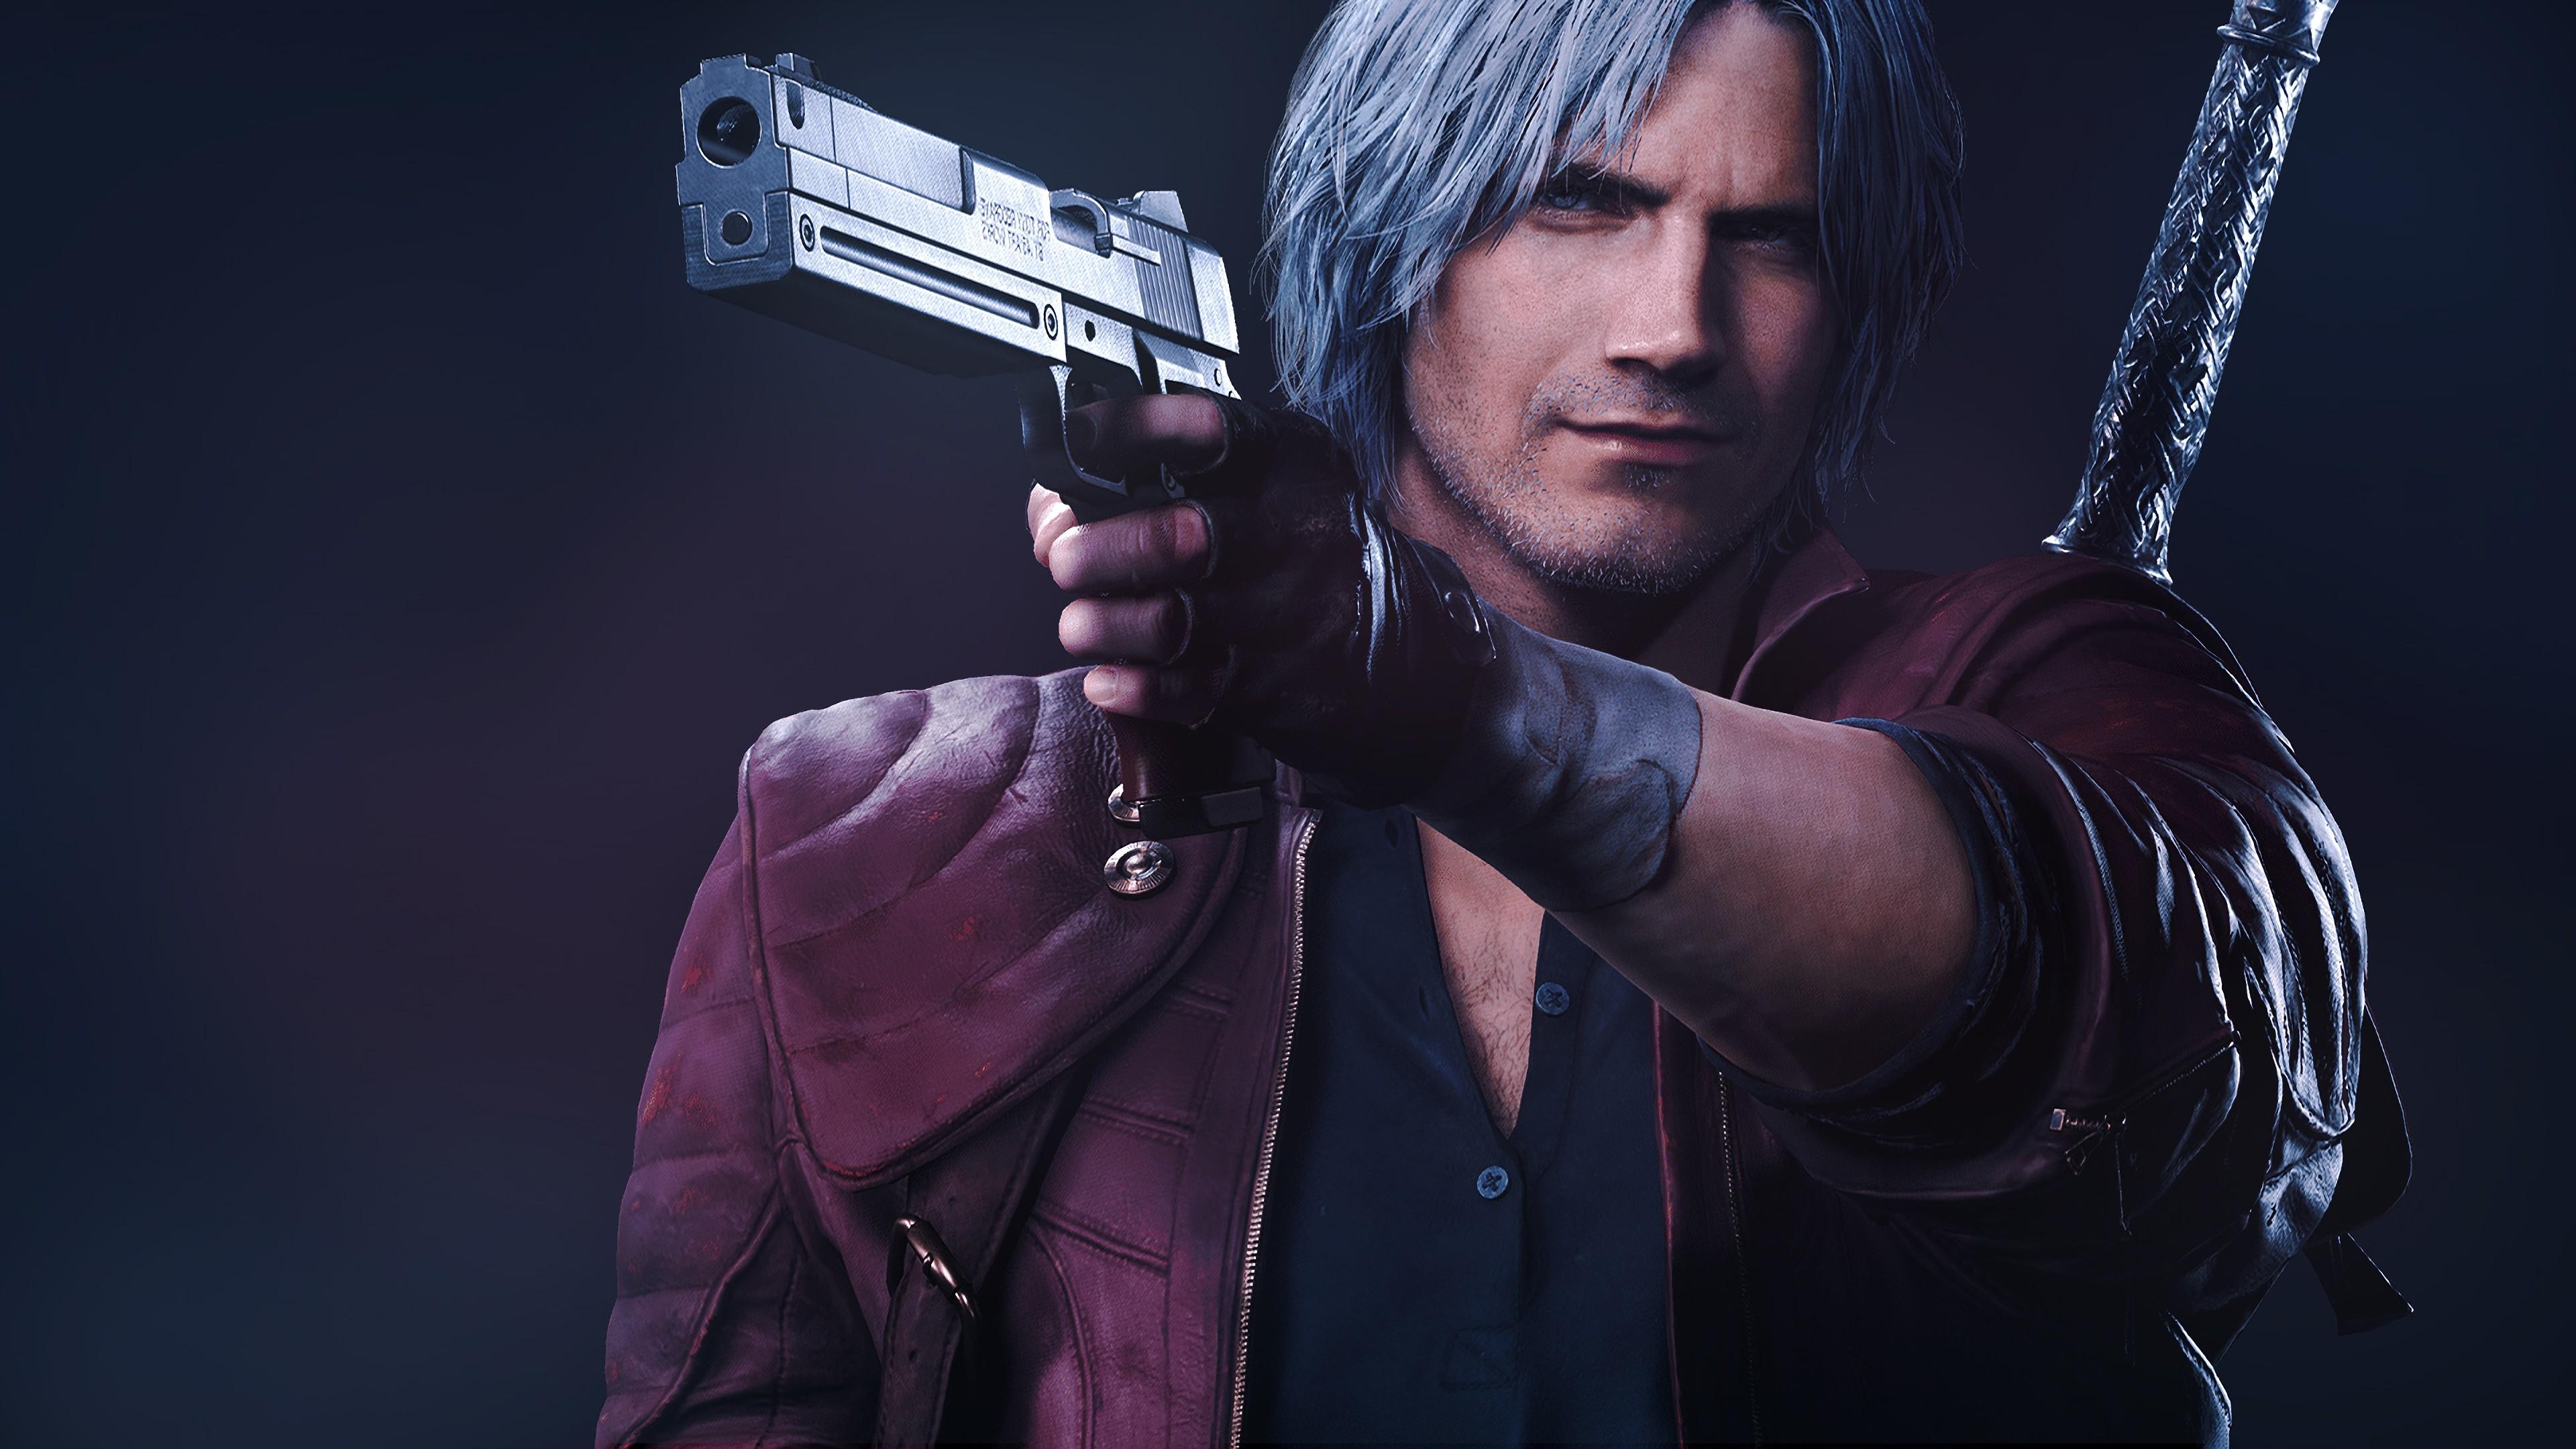 Dante from Devil May Cry 5 Wallpaper 4k Ultra HD